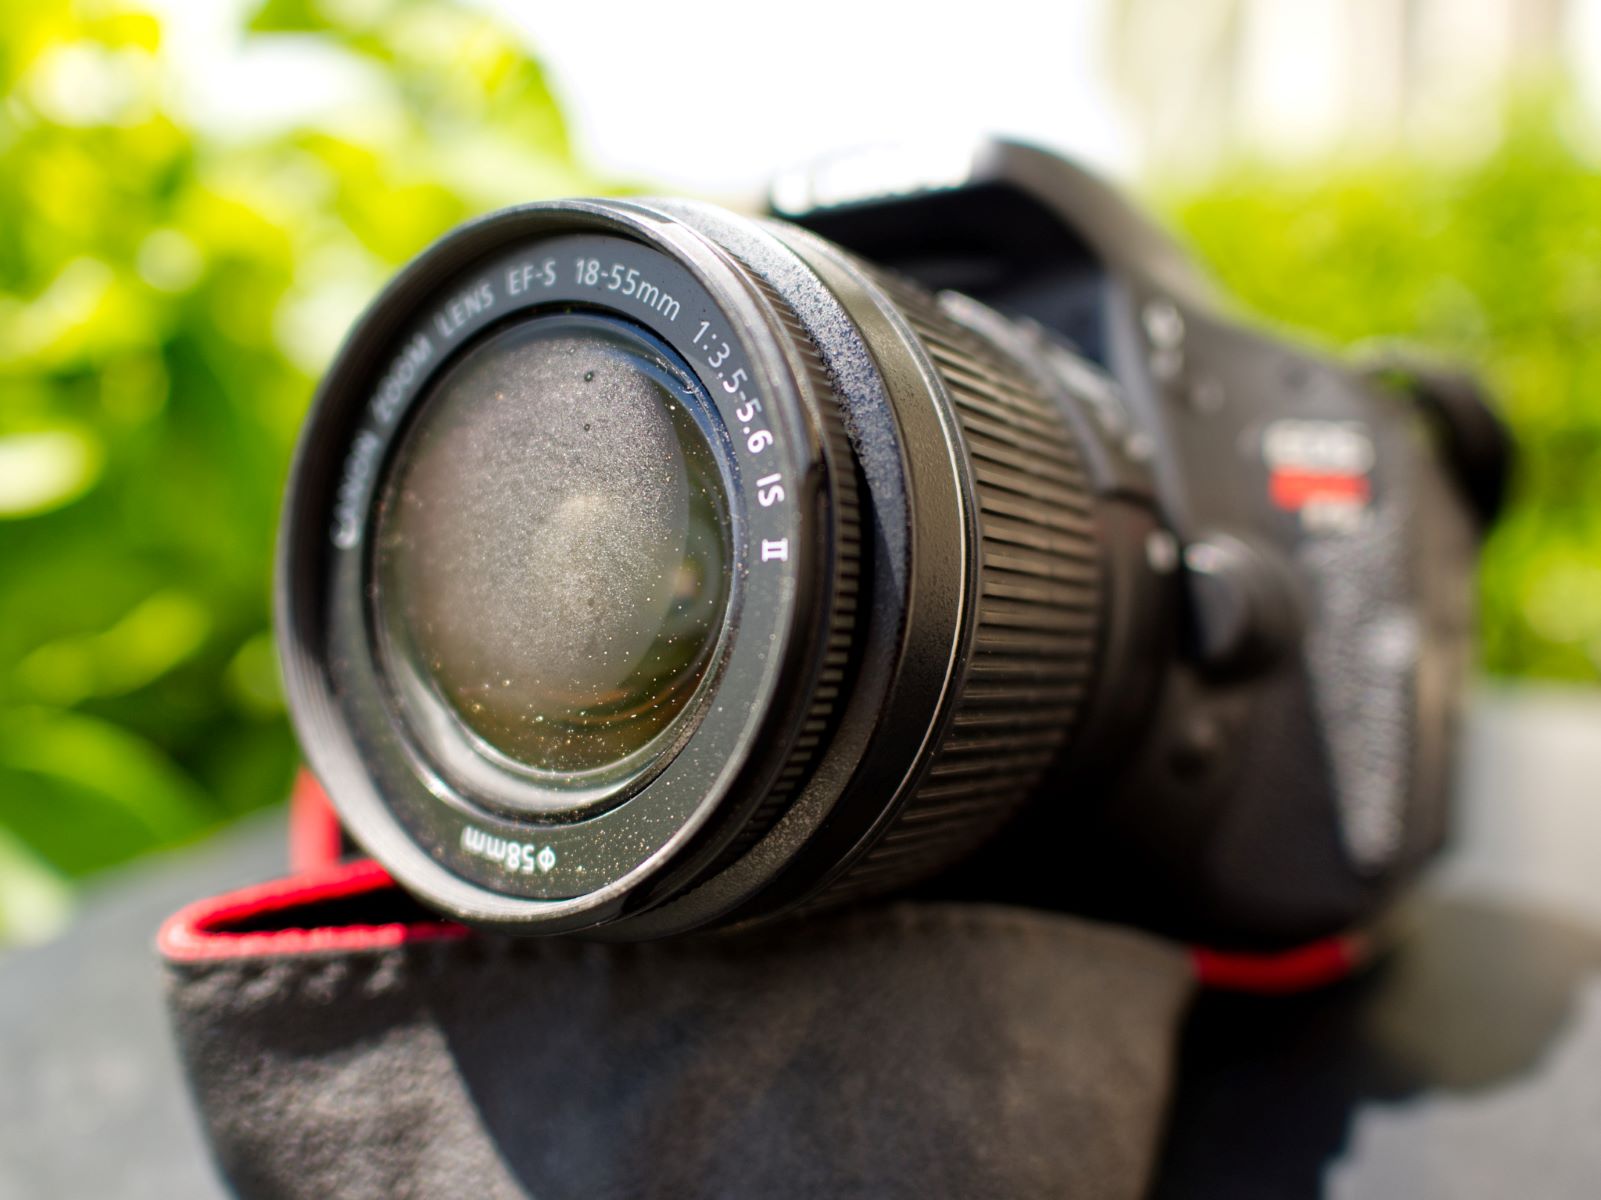 How To Remove Water From DSLR Camera Lens